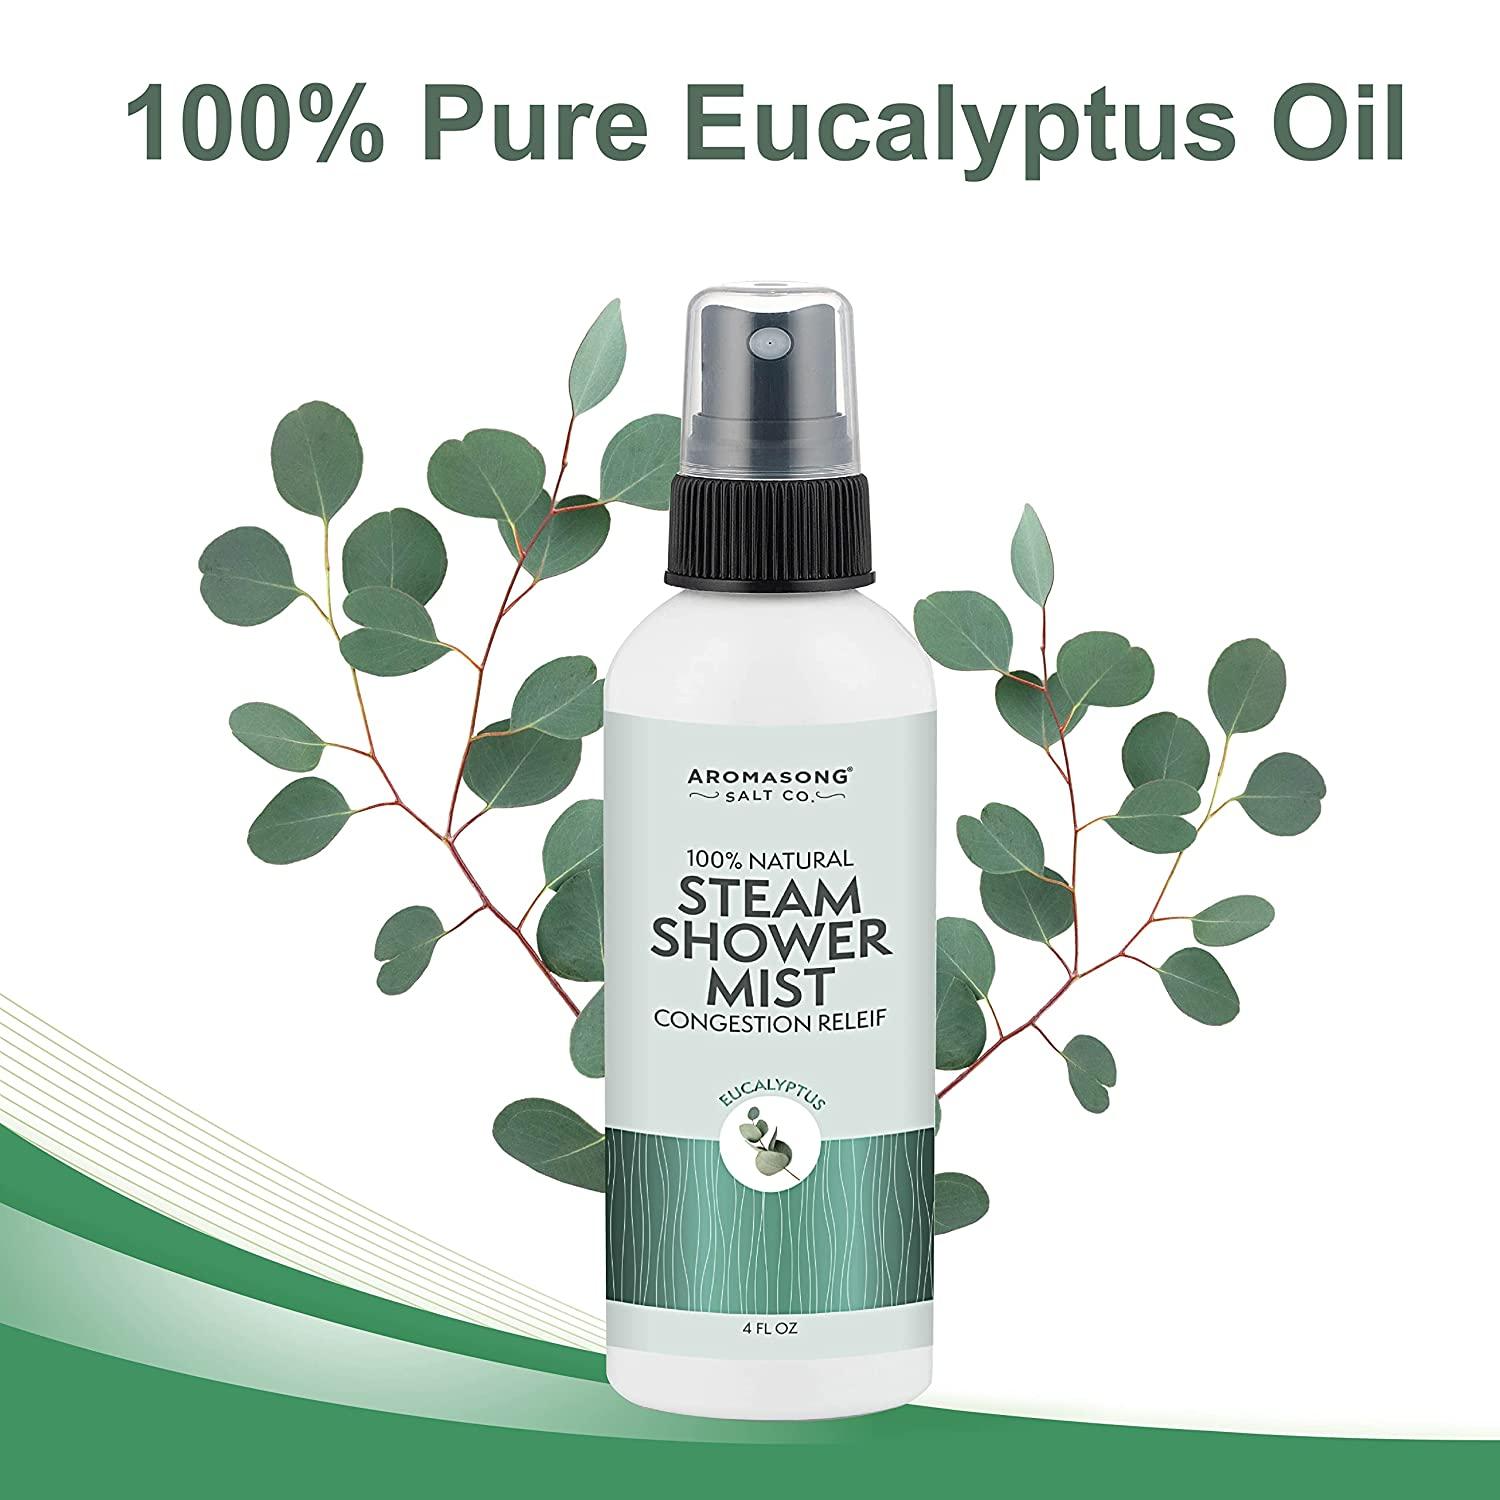 Monsuri Eucalyptus Shower Spray Aromatherapy Mist: Steam Shower Eucalyptus Oil Spray for A Relaxing at Home Spa Day Experience. Ideal Self Care Gifts